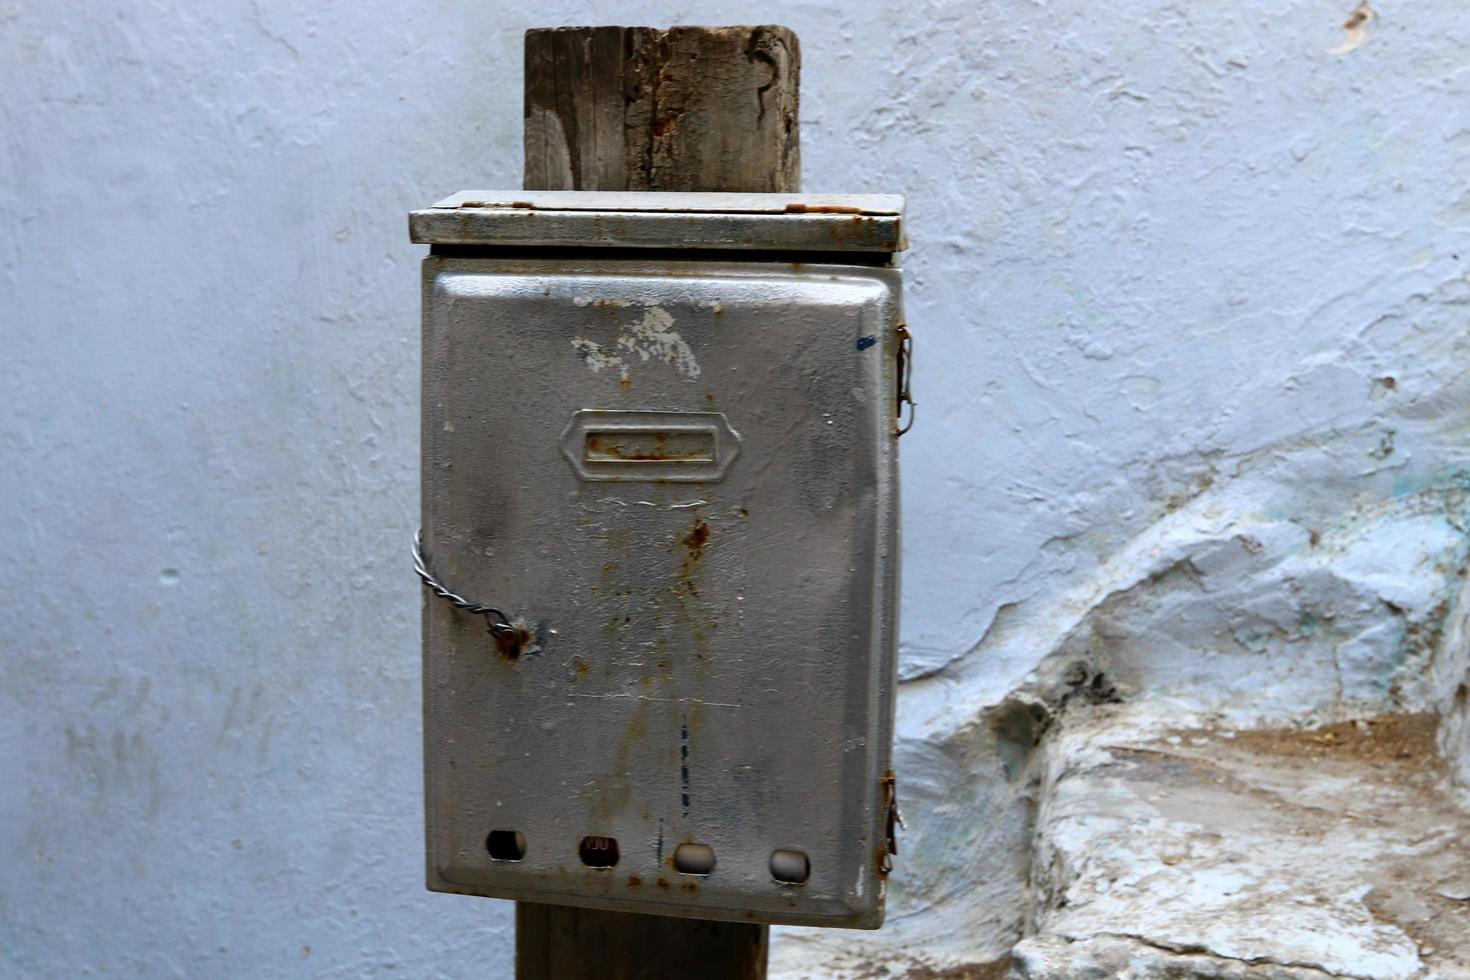 Safed Israel October 11, 2019. Mailbox on the front of the house. photo